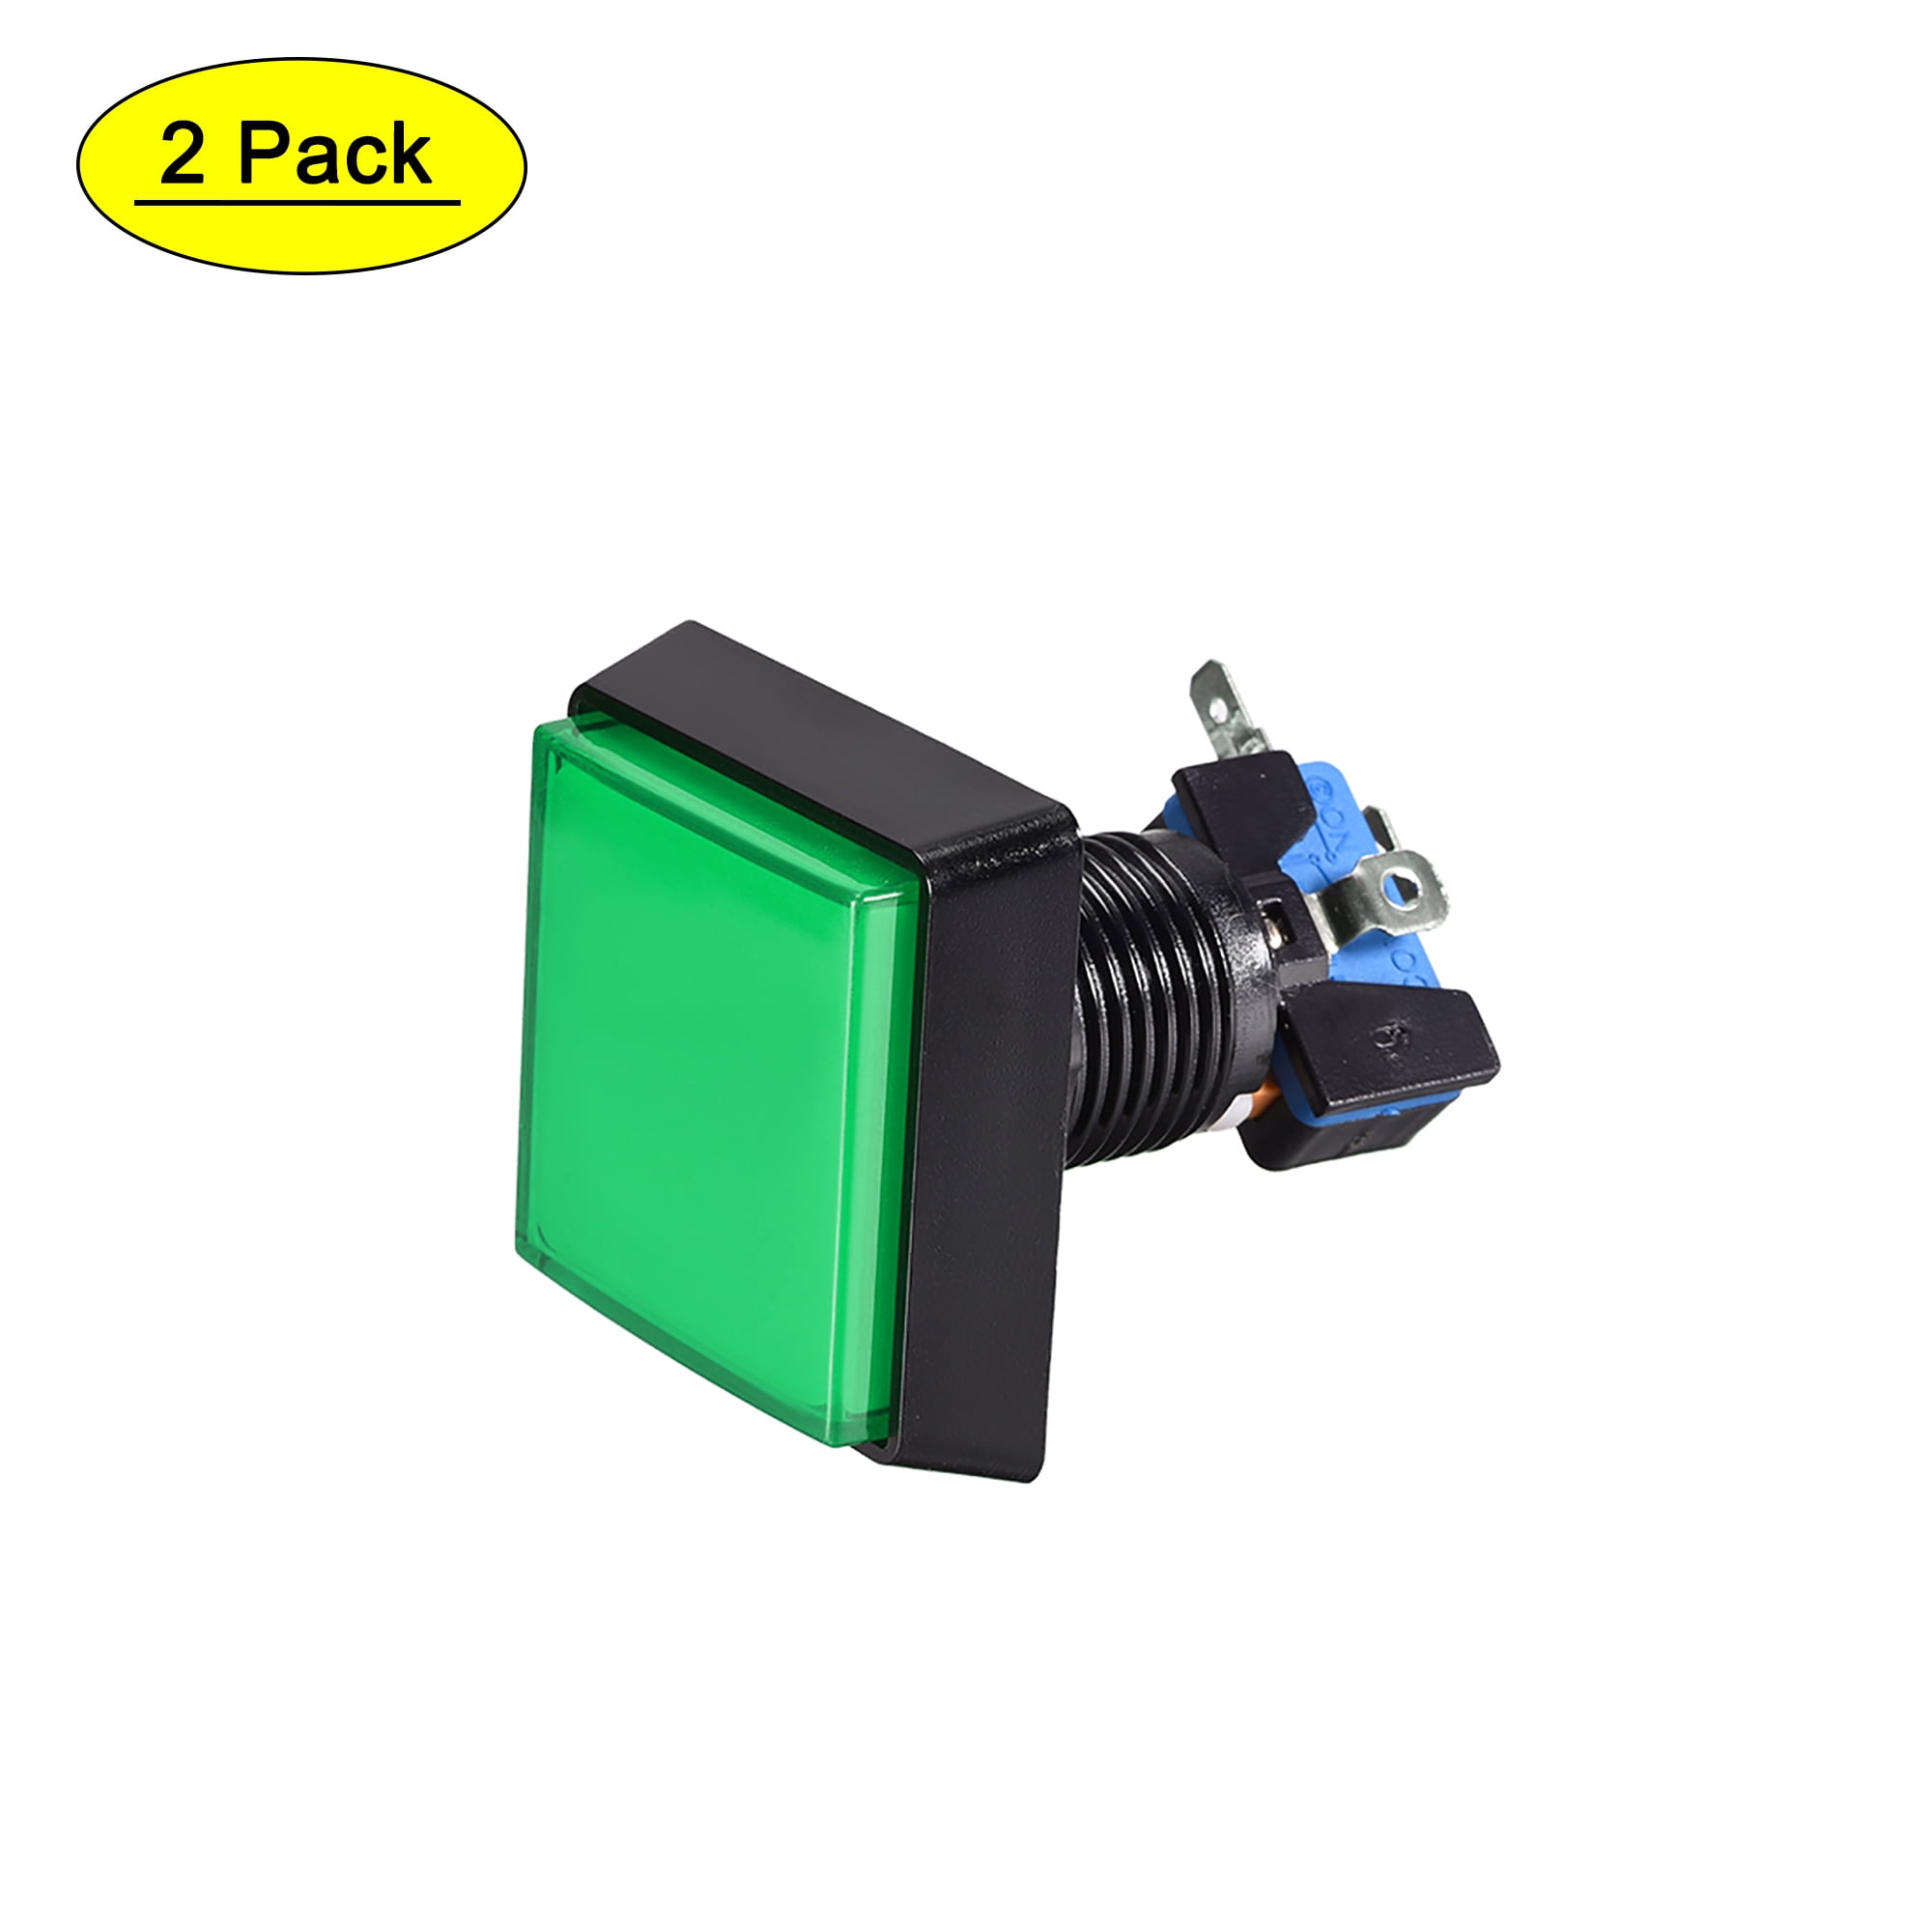 Game Push Button Switch Illuminated 50x50 for Square Micro Push Video 2pcs with Green Arcade switch 12V Button LED